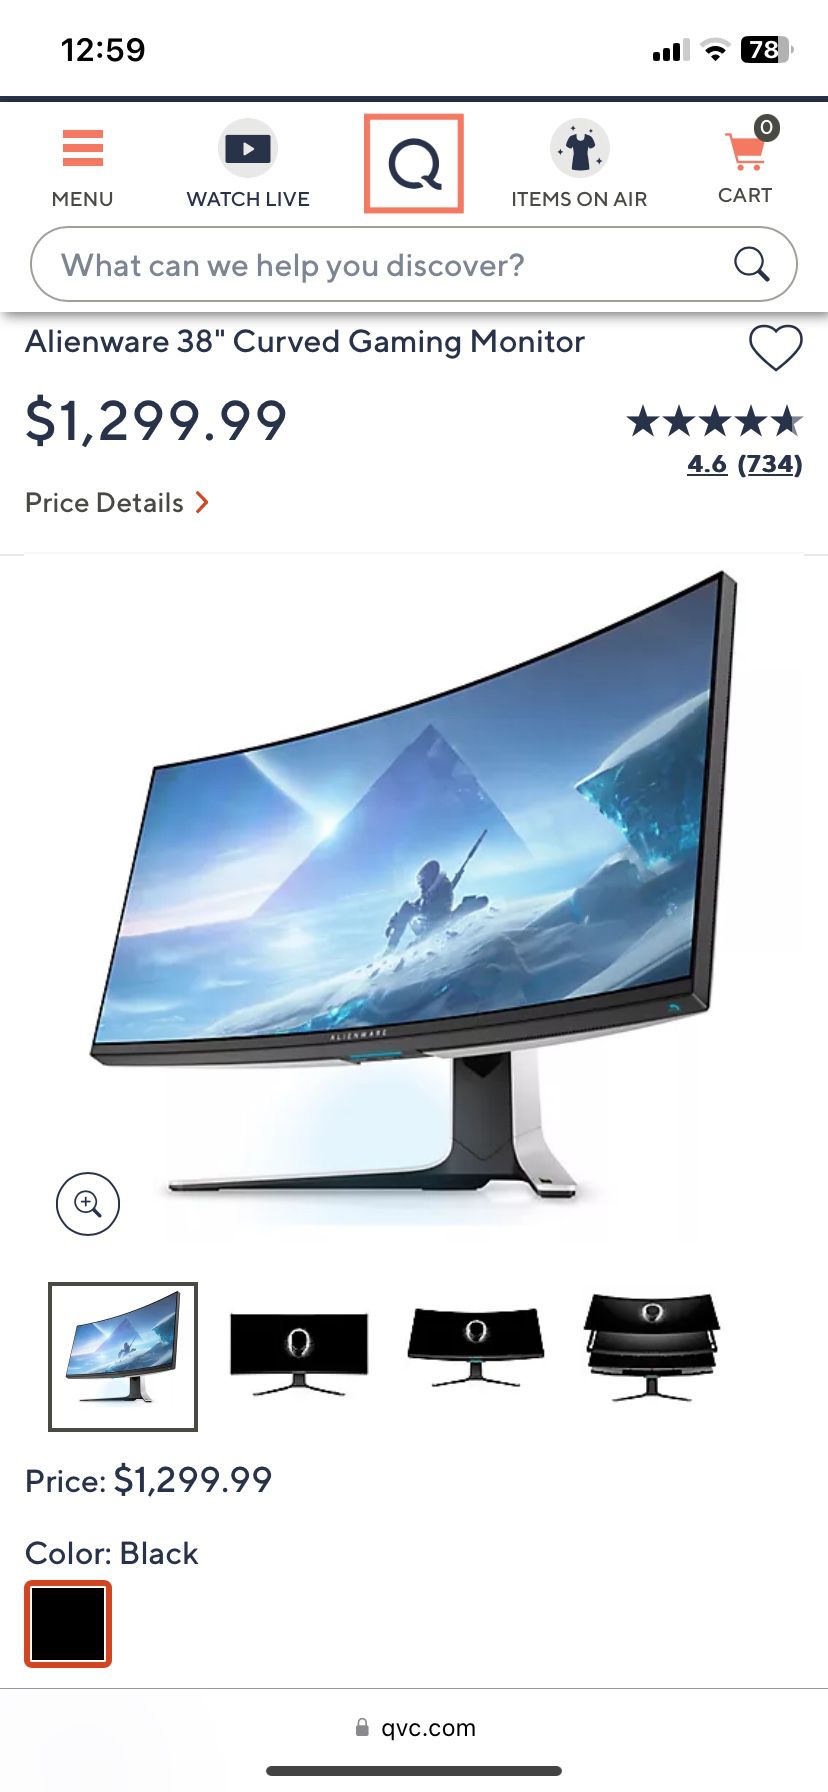 Alienware 38” Curved Gaming Monitor 